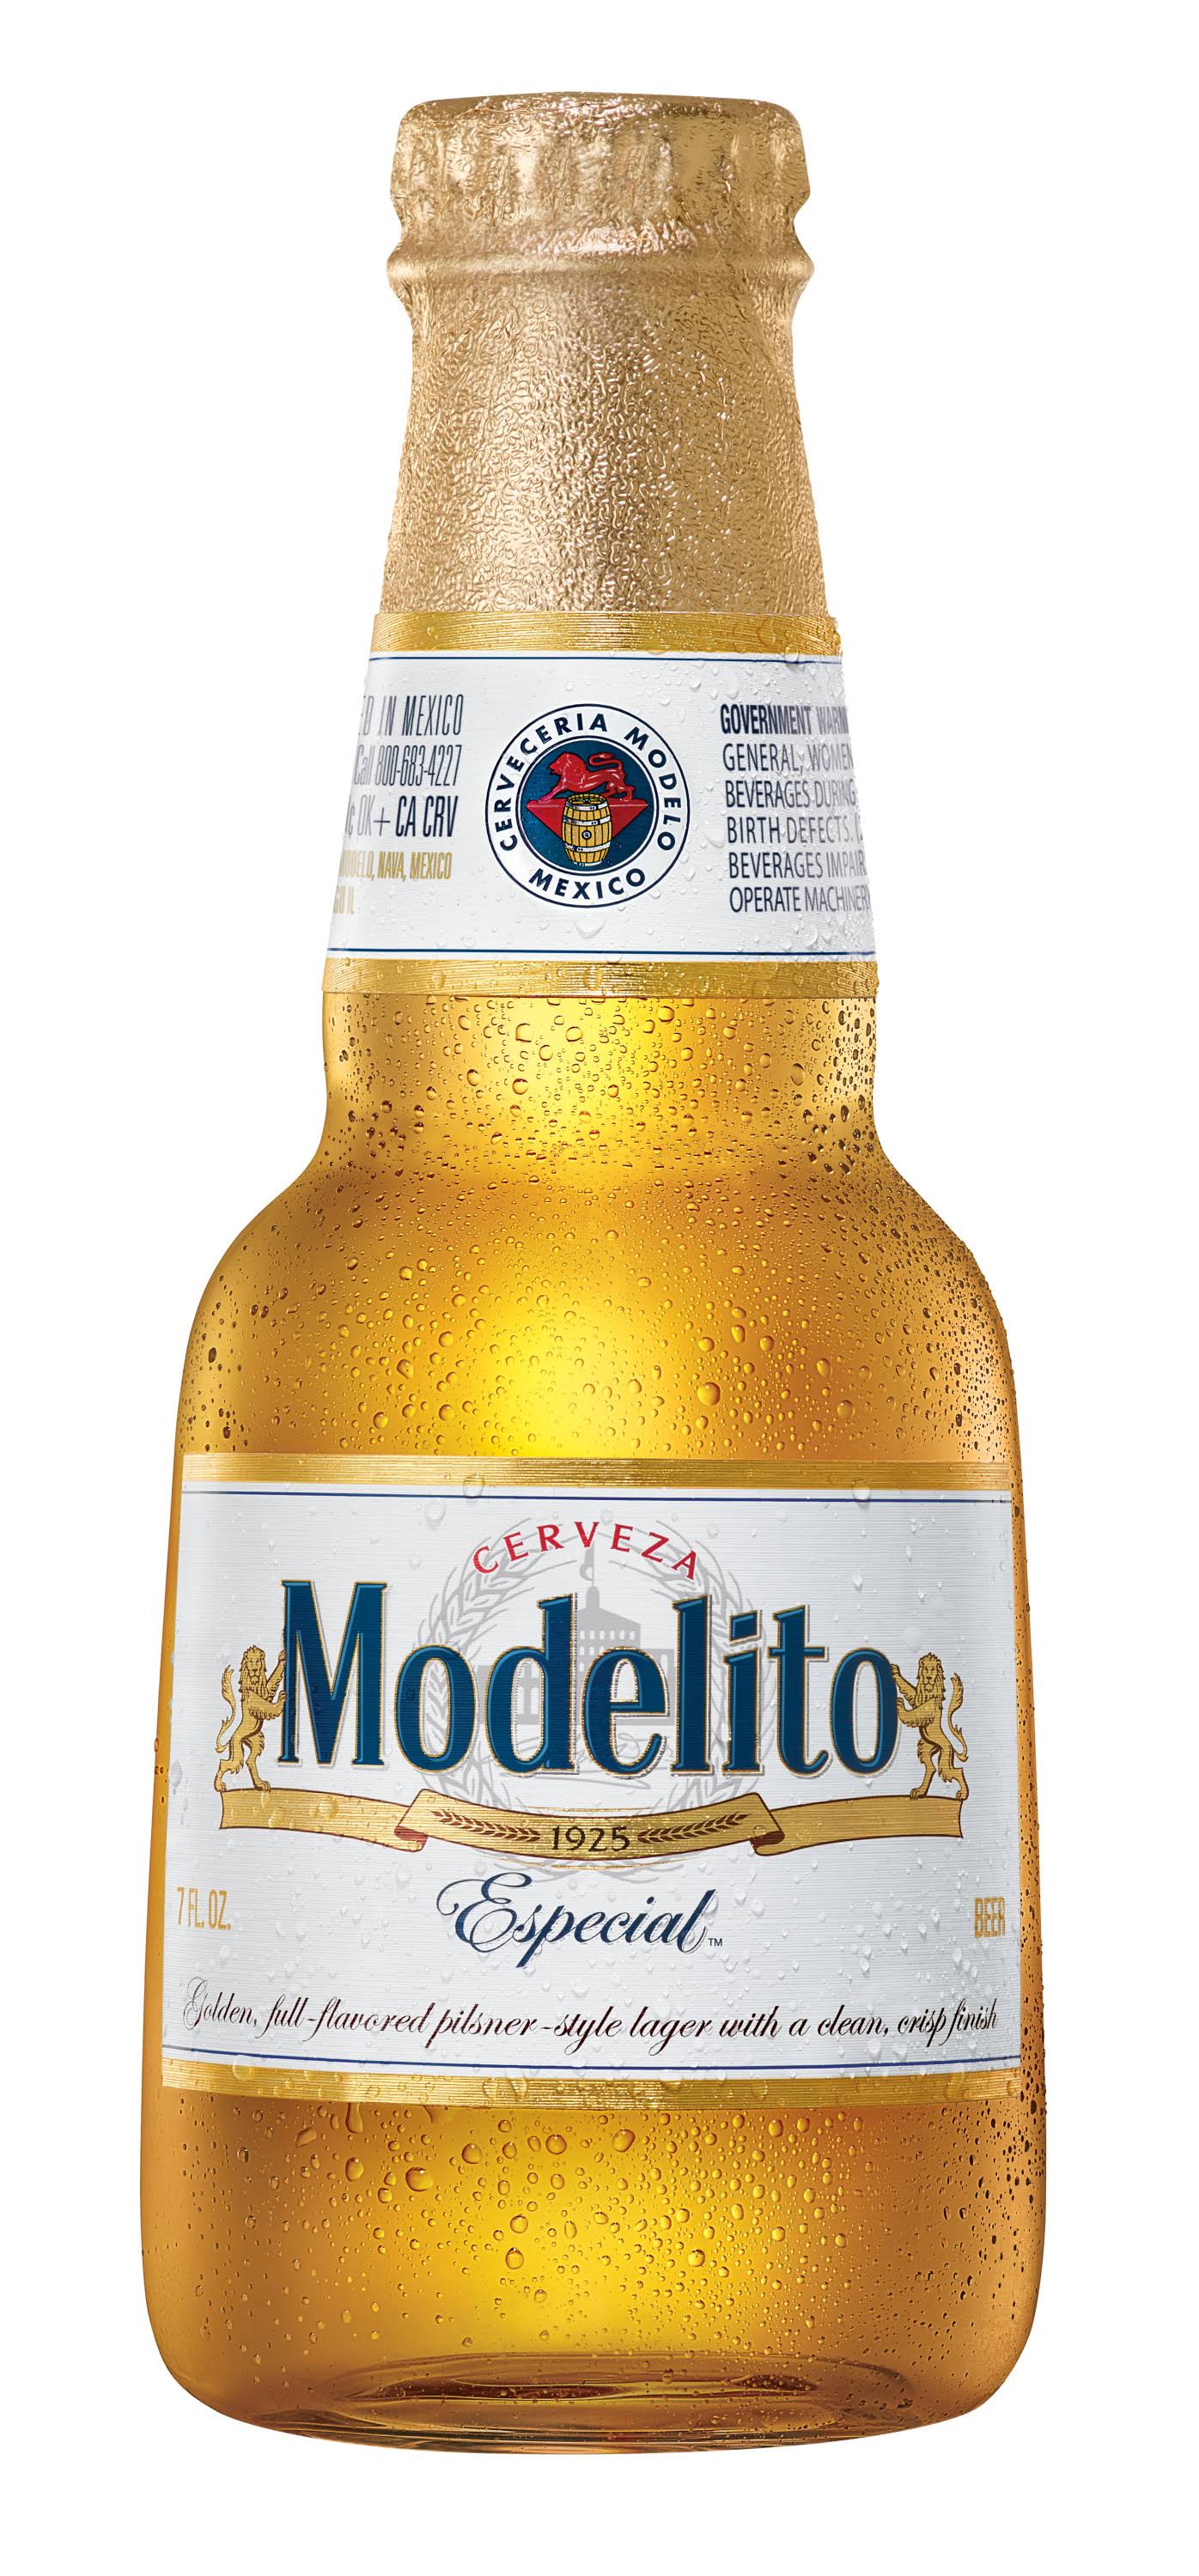 Modelo Especial Lager Mexican Beer (7oz bottle)